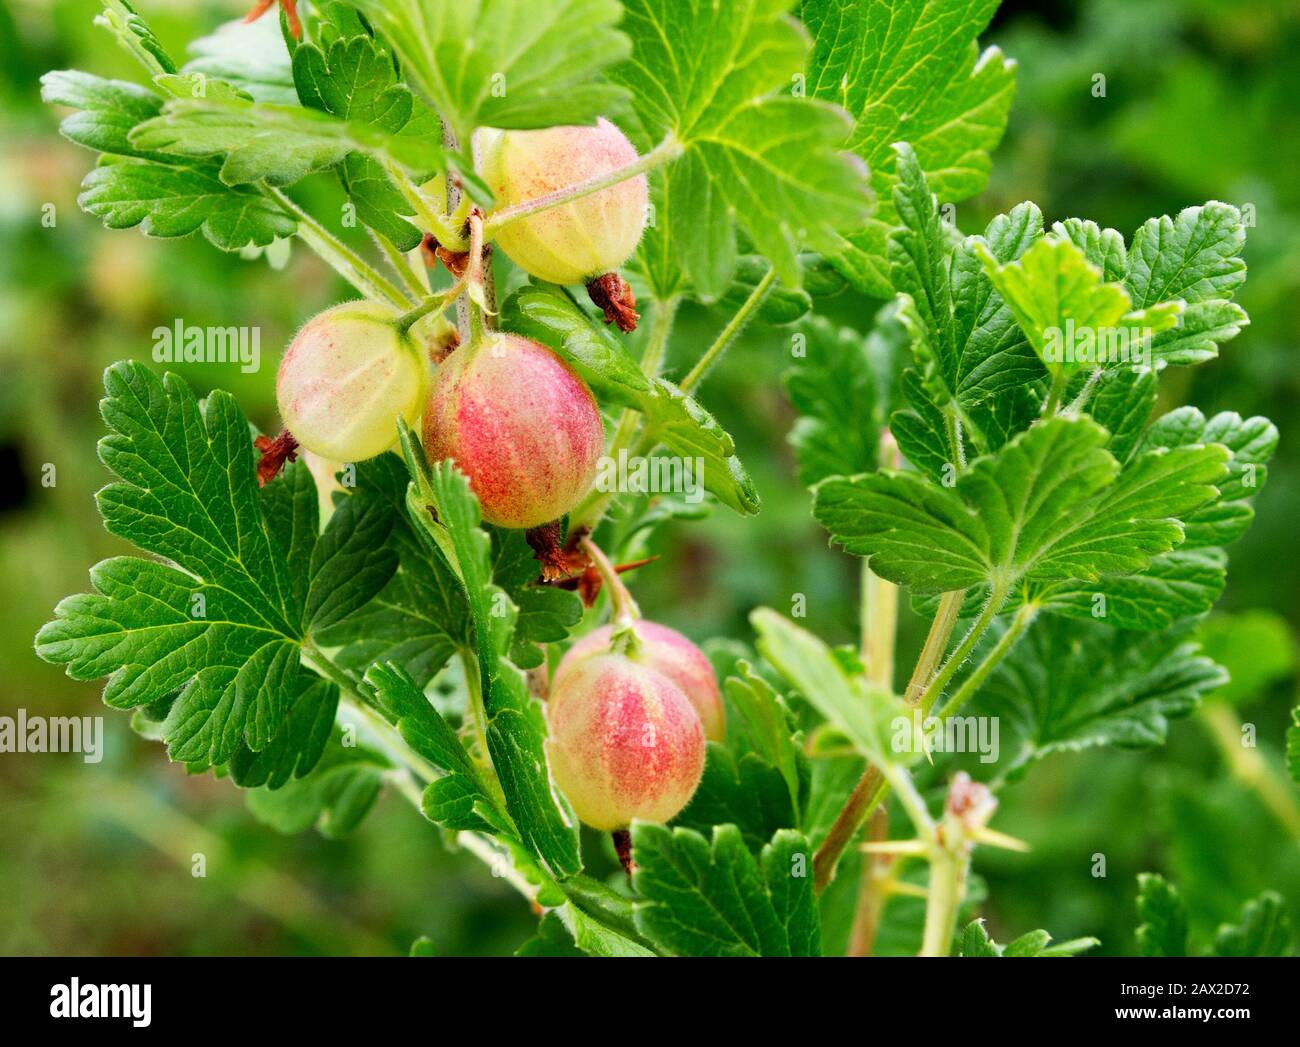 Gooseberries branch with fruits. Gooseberry bush Ribes uva-crispa 'Invicta'  growing in an Russian garden. Fresh gooseberries on a branch Stock Photo -  Alamy